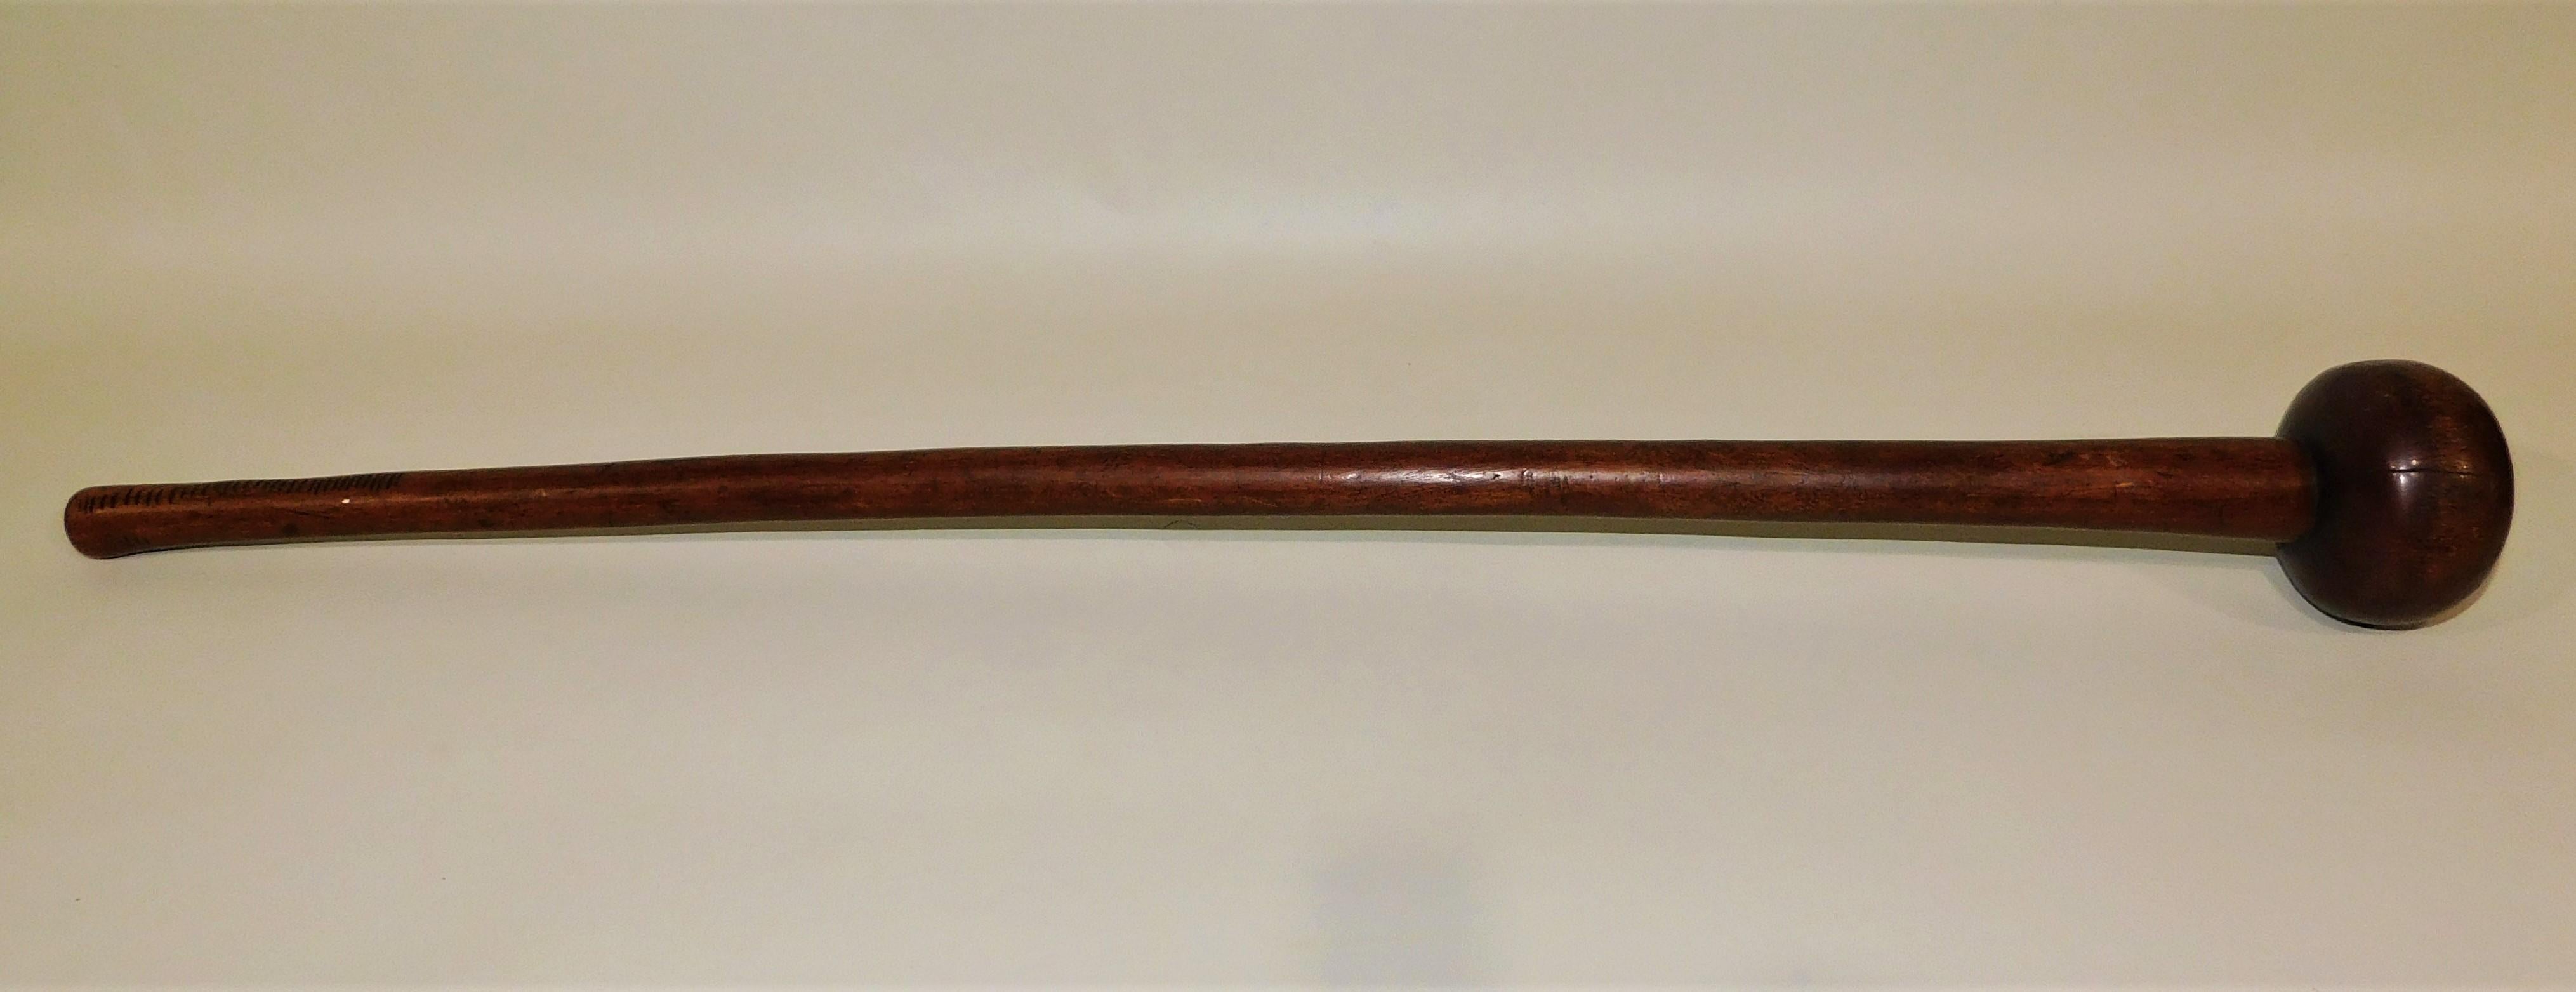 19th century Zulu war club known as a Knobkerrie made from the wood of a root ball or wad and carried by Zulu warriors in South Africa. Made from the hard wood of a root ball of a tree or ironwood, with the shaft carved from just one limb, making it